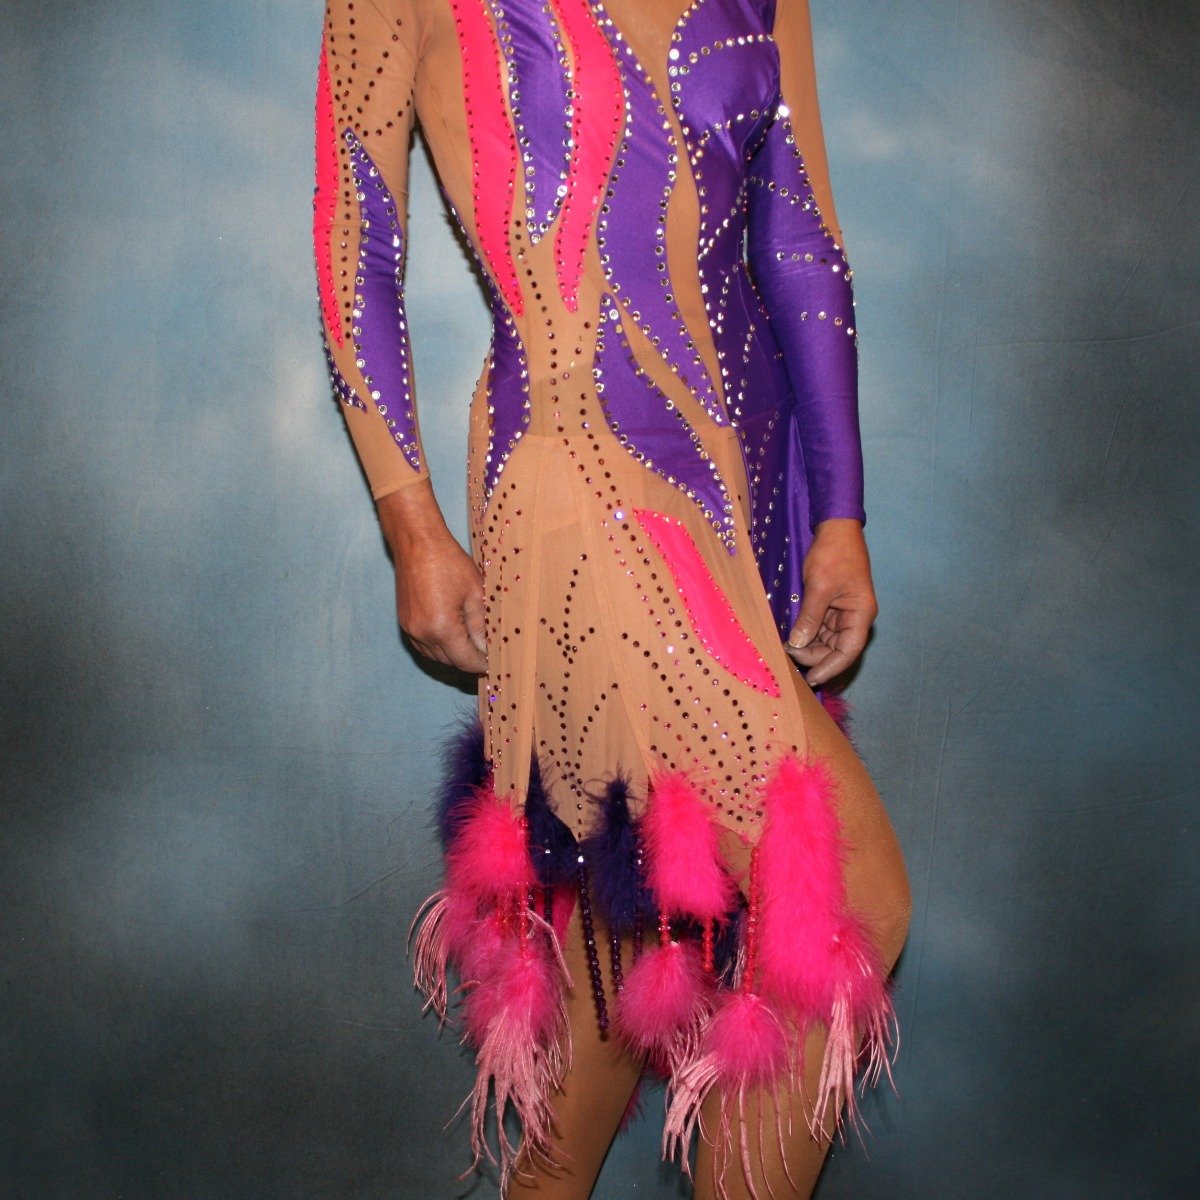 close right side  view of Crystal's Creations Purple & hot pink Latin/rhythm dress created of detailed artwork of purple & hot pink lycra on a nude illusion base, embellished with purple, fuchsia Swarovski rhinestone work, along with marabou feathers & hand beading.